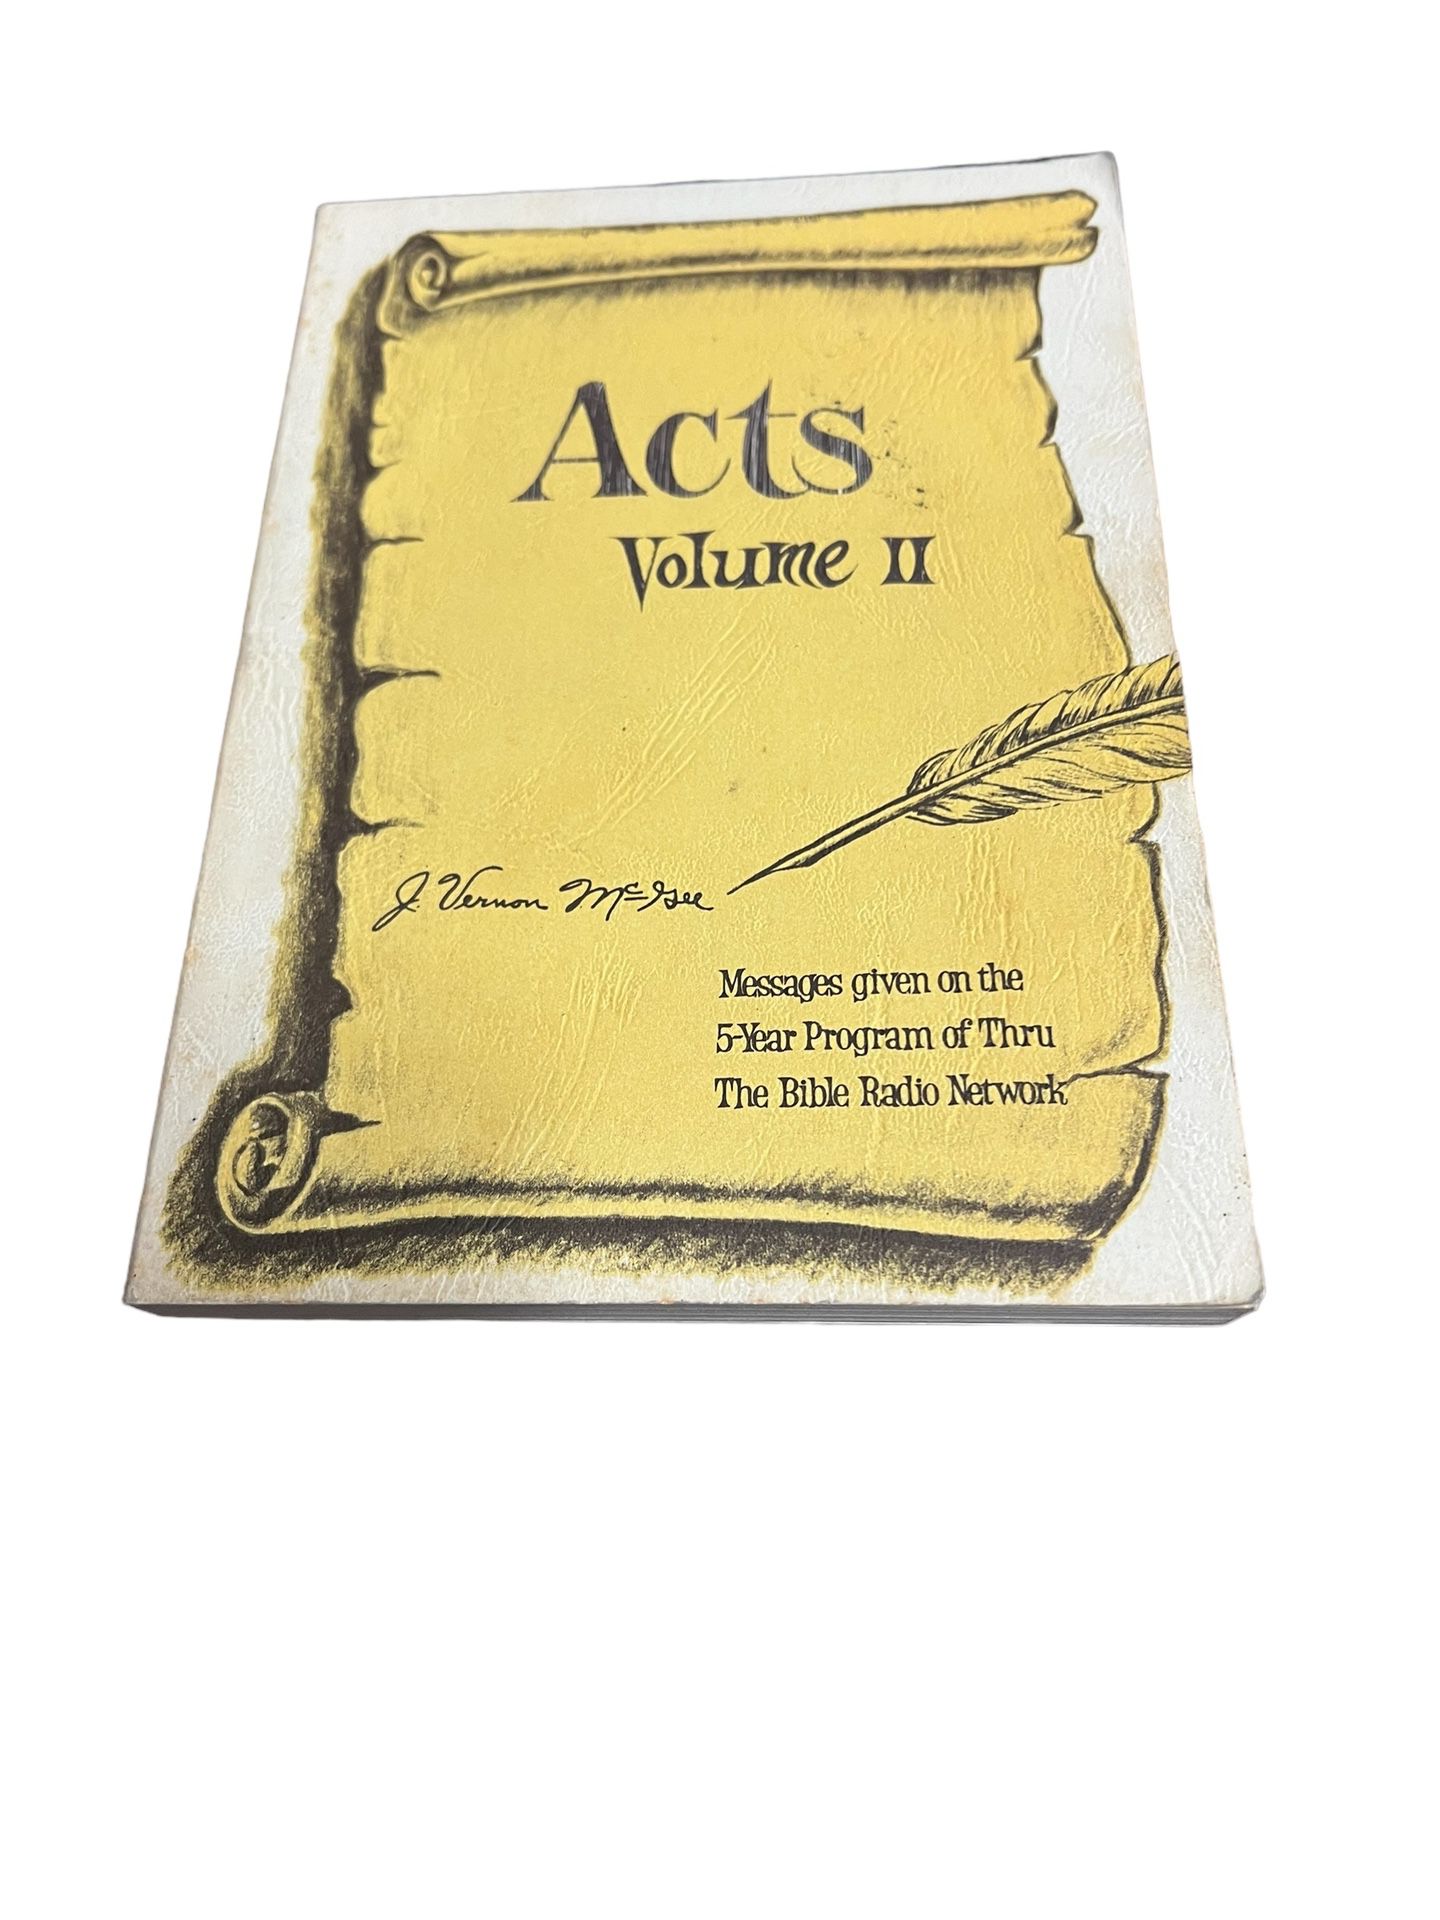 This paperback book titled "Acts. Volume 2. Chapters 15-28" is a great addition to your collection. Written by J. Vernon Mcgee, this book delves into 